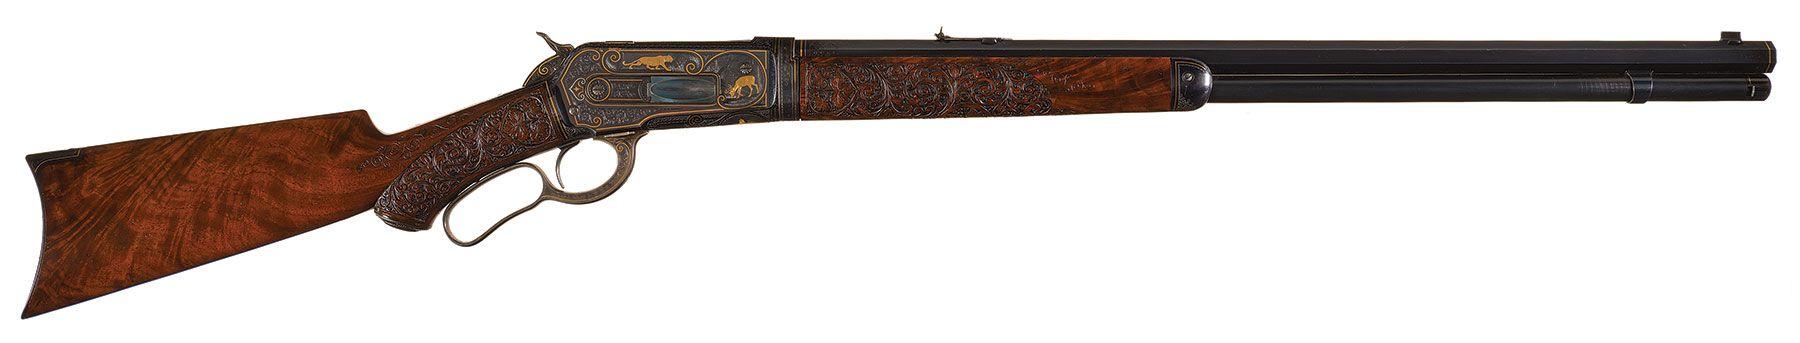 No. 1 Engraved Winchester Model 1886 Express Rifle